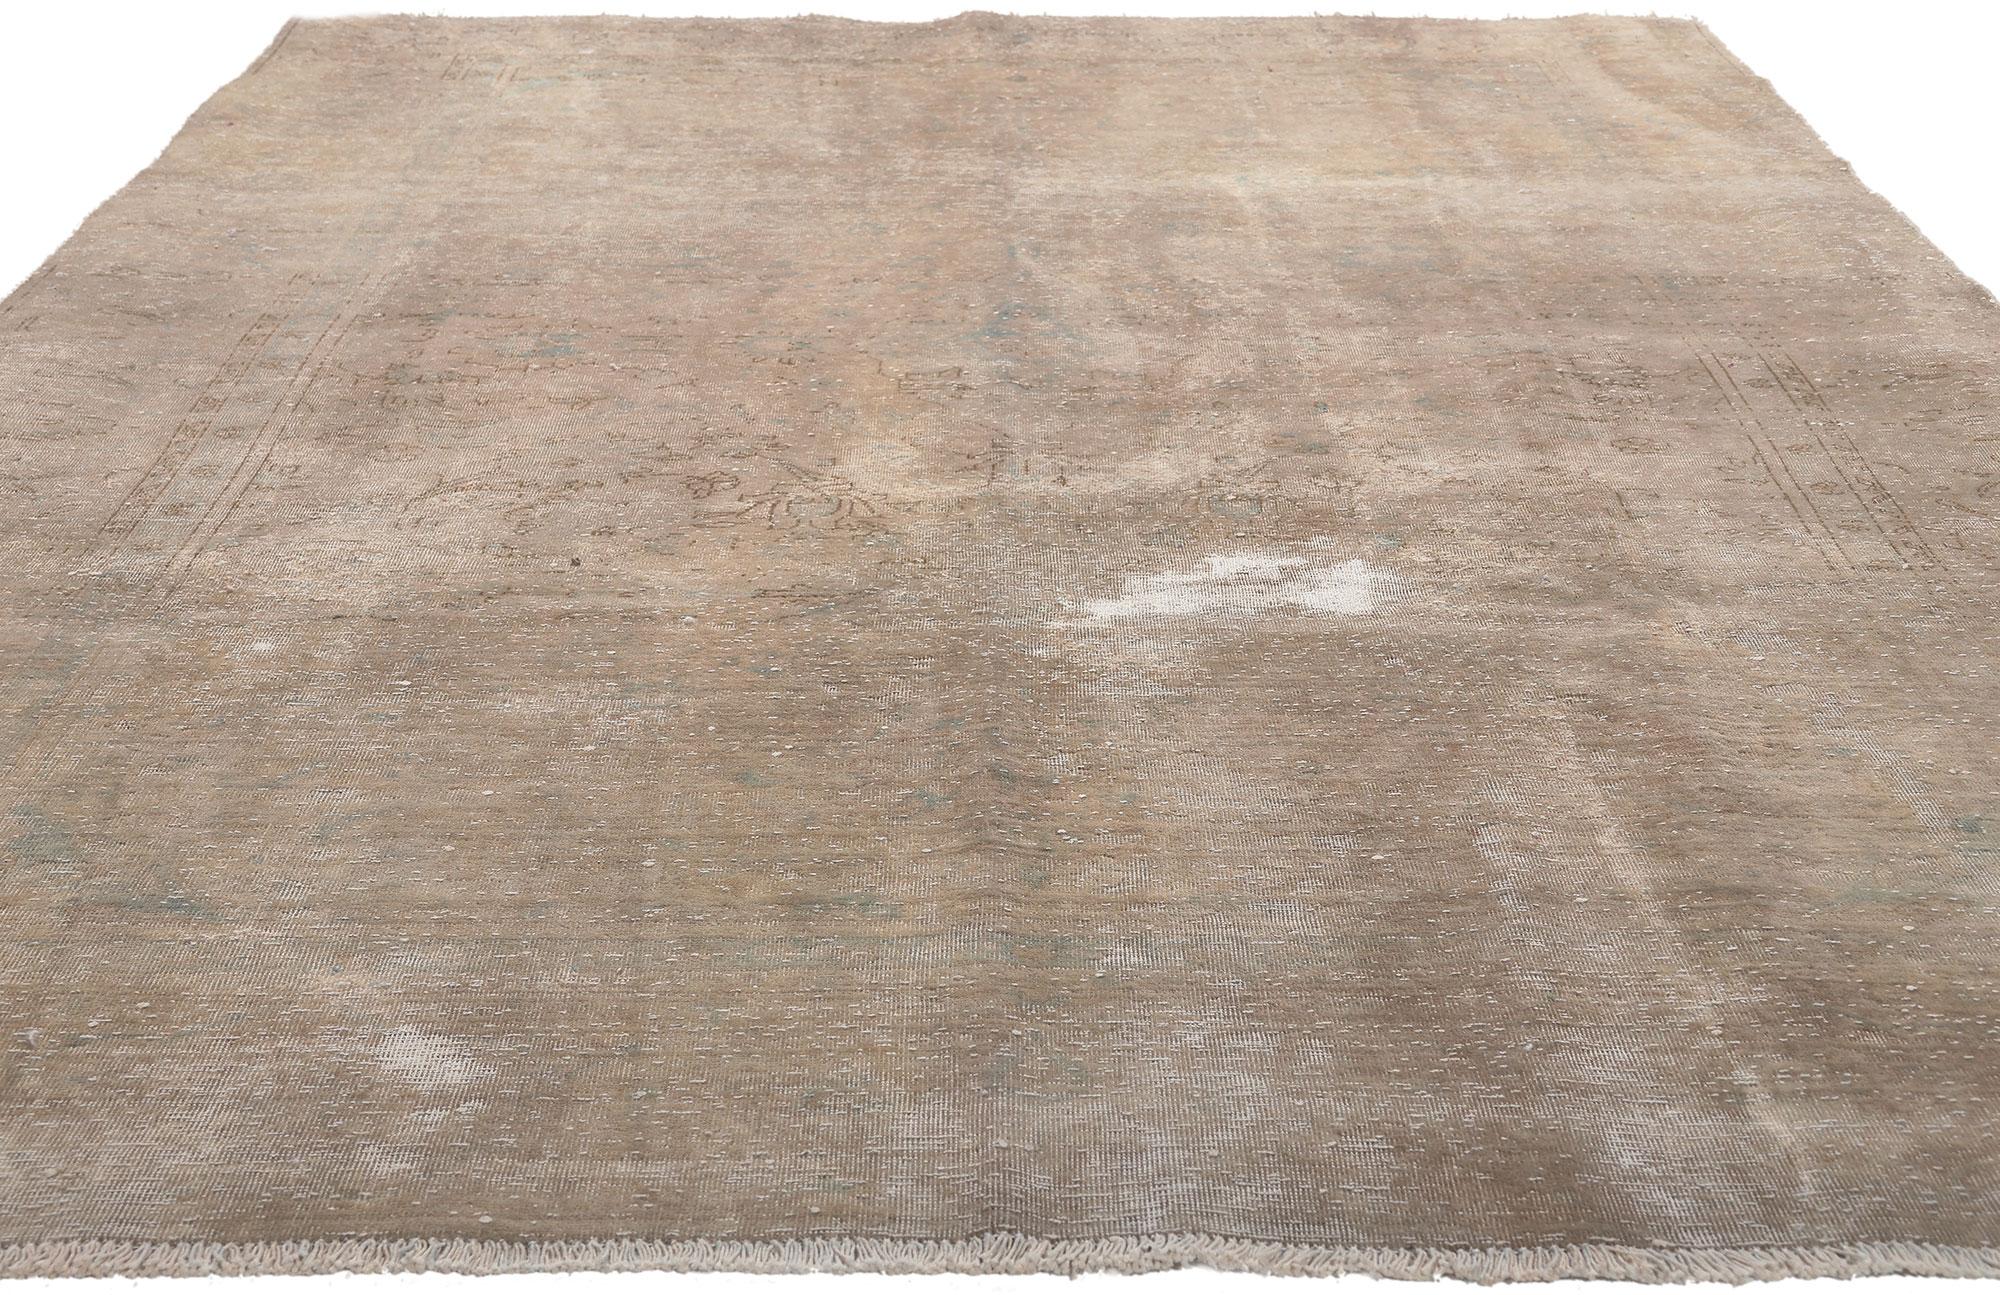 Kashan Distressed Faded Antique Persian Rug, Shabby Chic Luxe Meets Earth-Tone Elegance For Sale